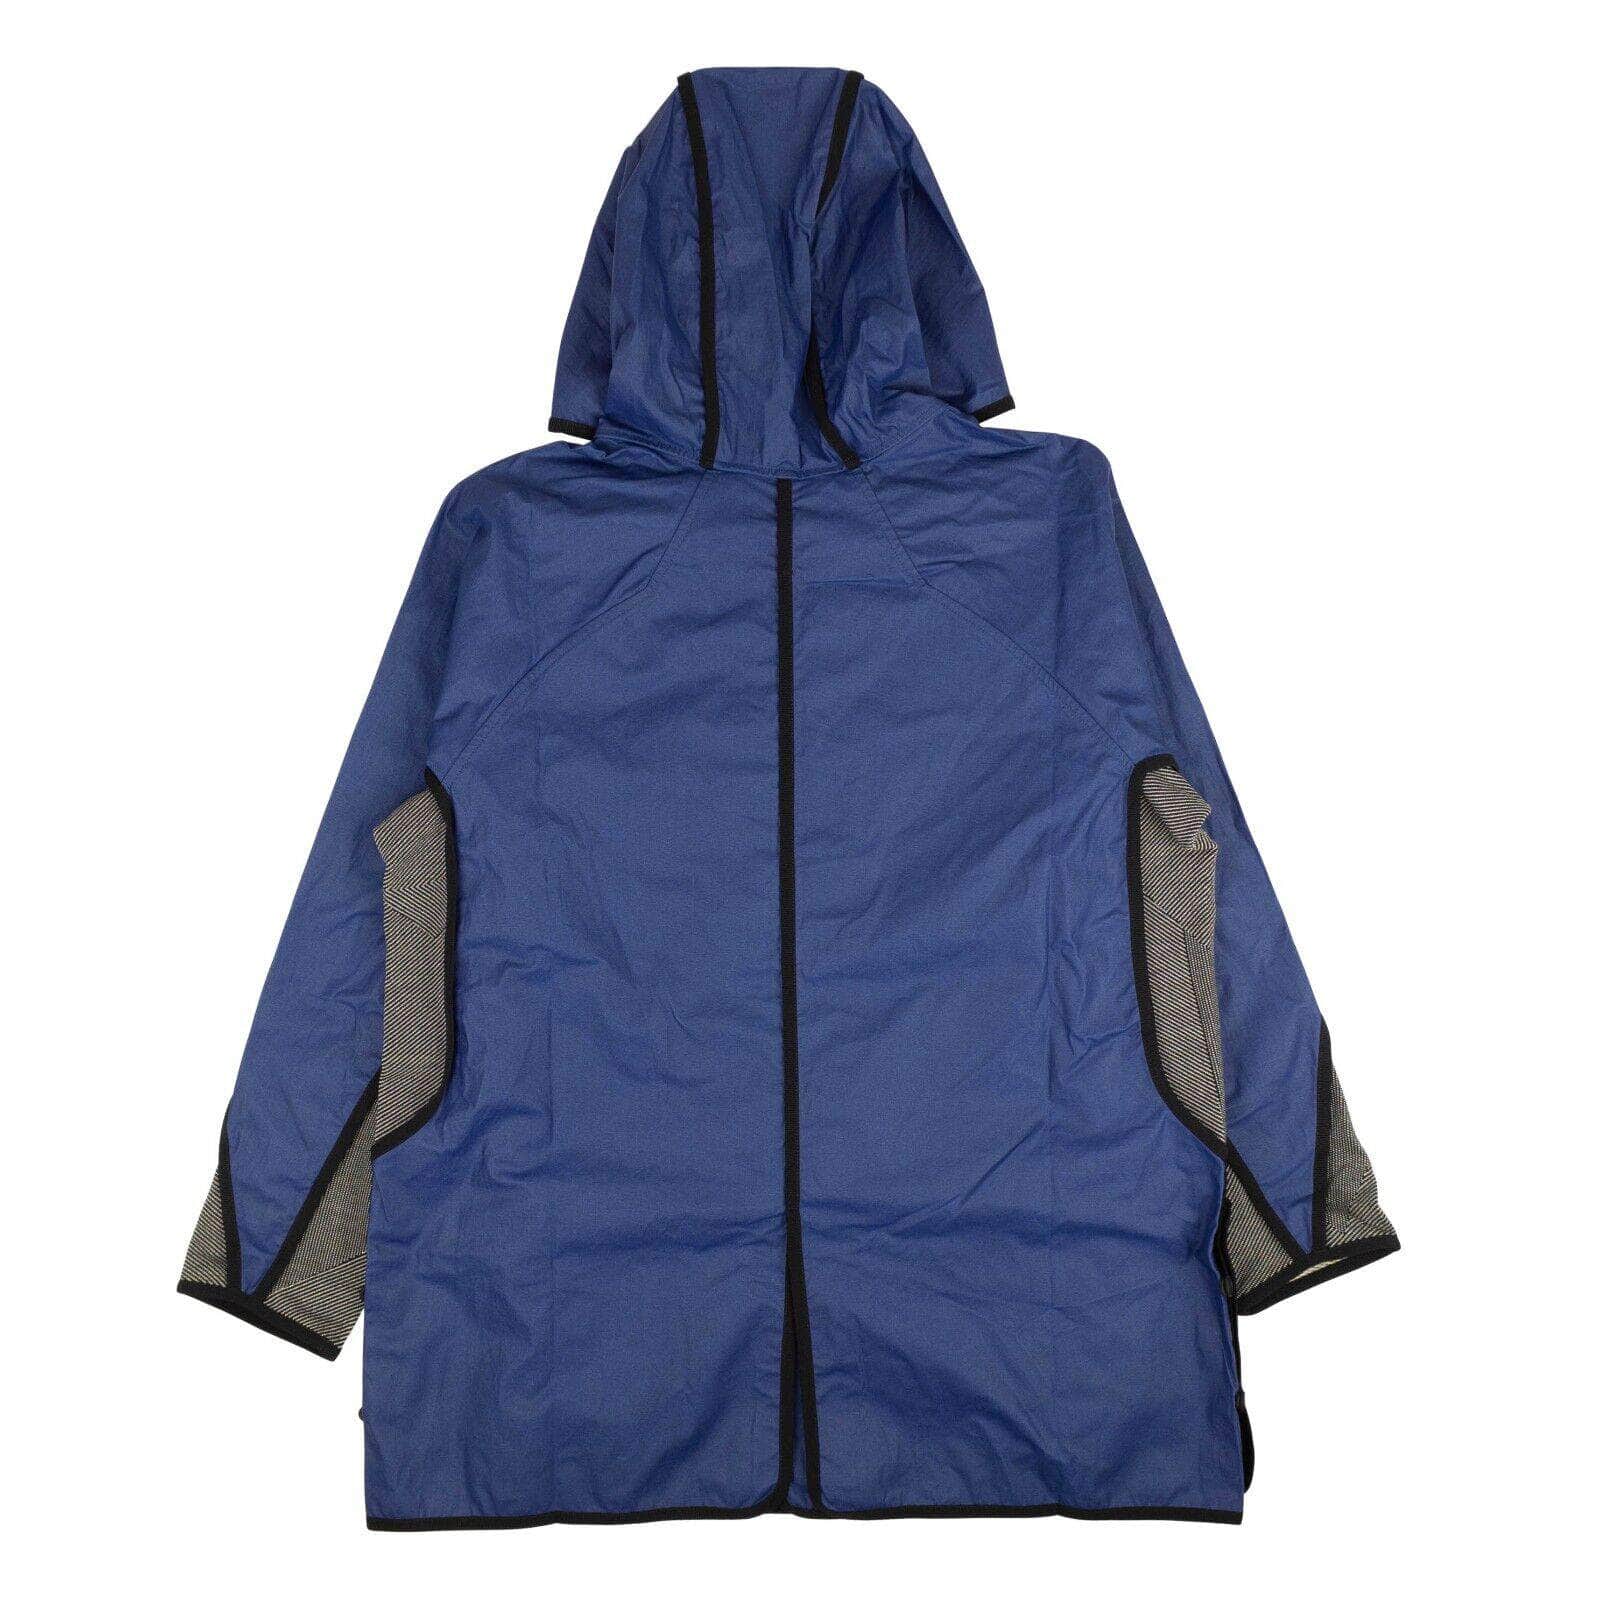 Byborre 250-500, byborre, channelenable-all, chicmi, couponcollection, gender-mens, main-clothing, mens-shoes, mens-track-jackets, MixedApparel, size-l, size-m, size-s, size-xl Blue G5 Hooded Jacket